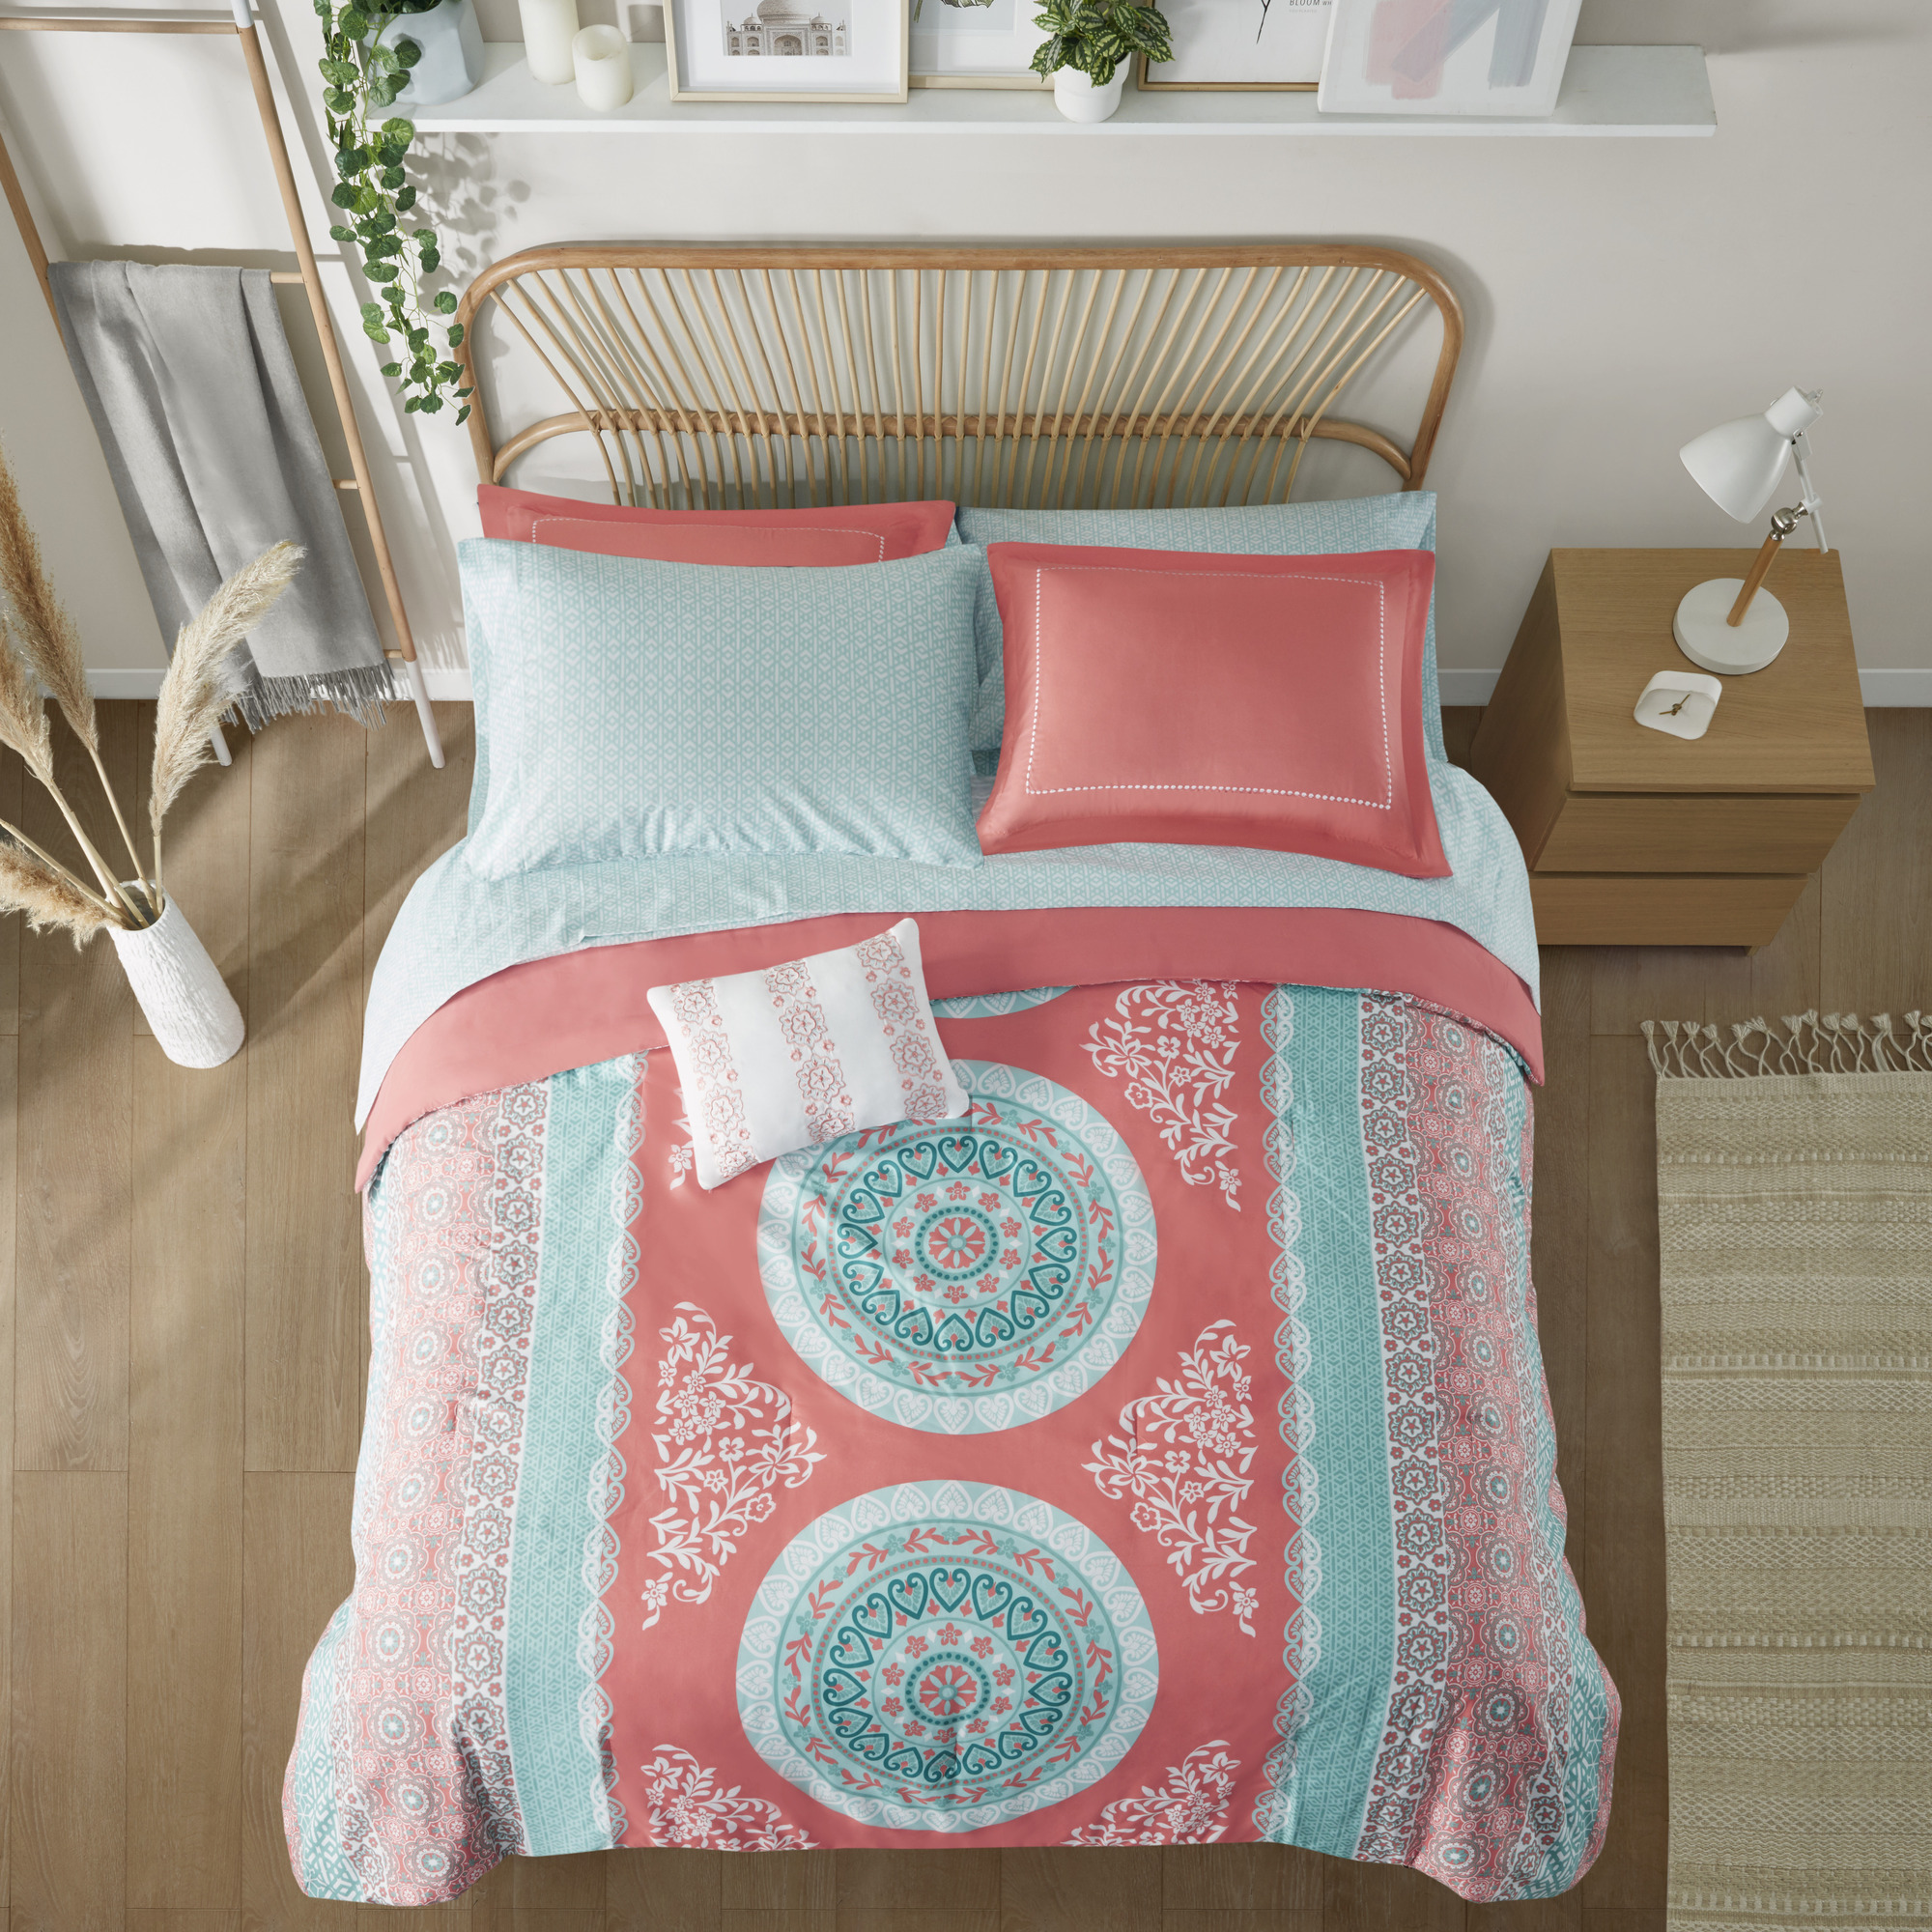 Intelligent Design 9-Piece Queen Comforter Sets with Sheet Bed in a Bag Coral Medallion Print Bedding Sets - image 5 of 12